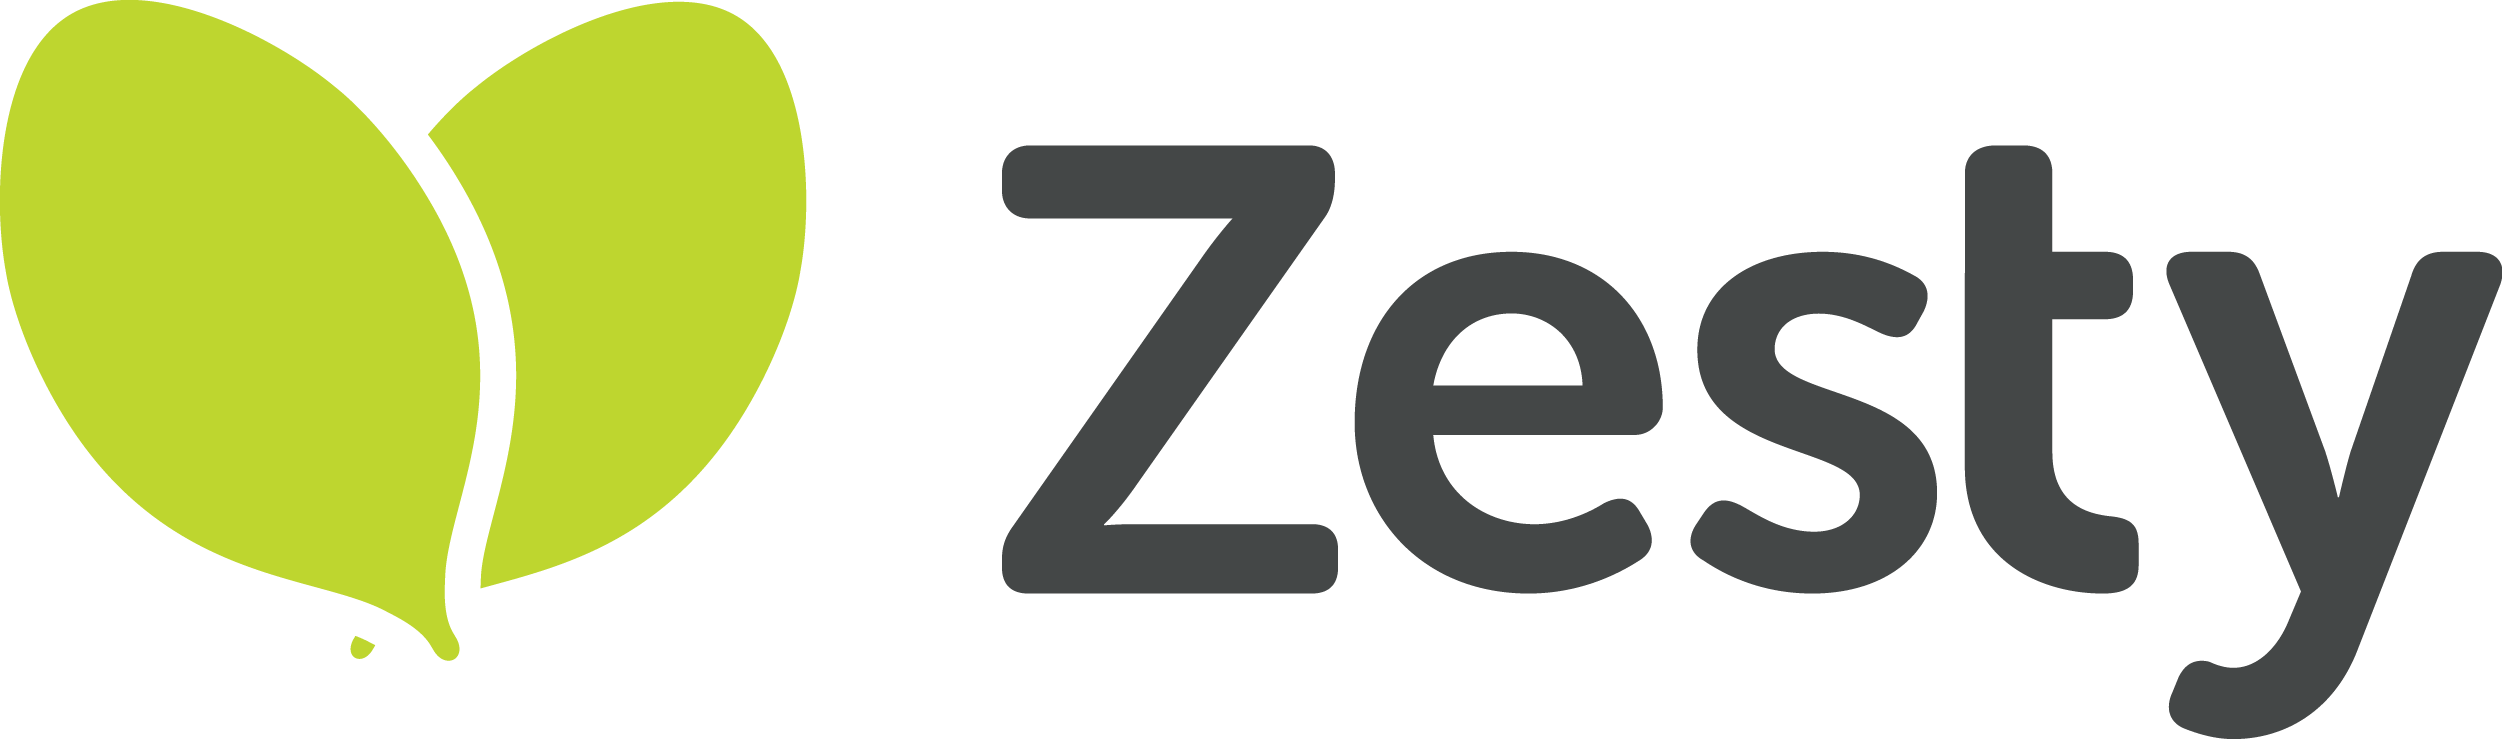 Zesty Logo - Zesty Competitors, Revenue and Employees - Owler Company Profile